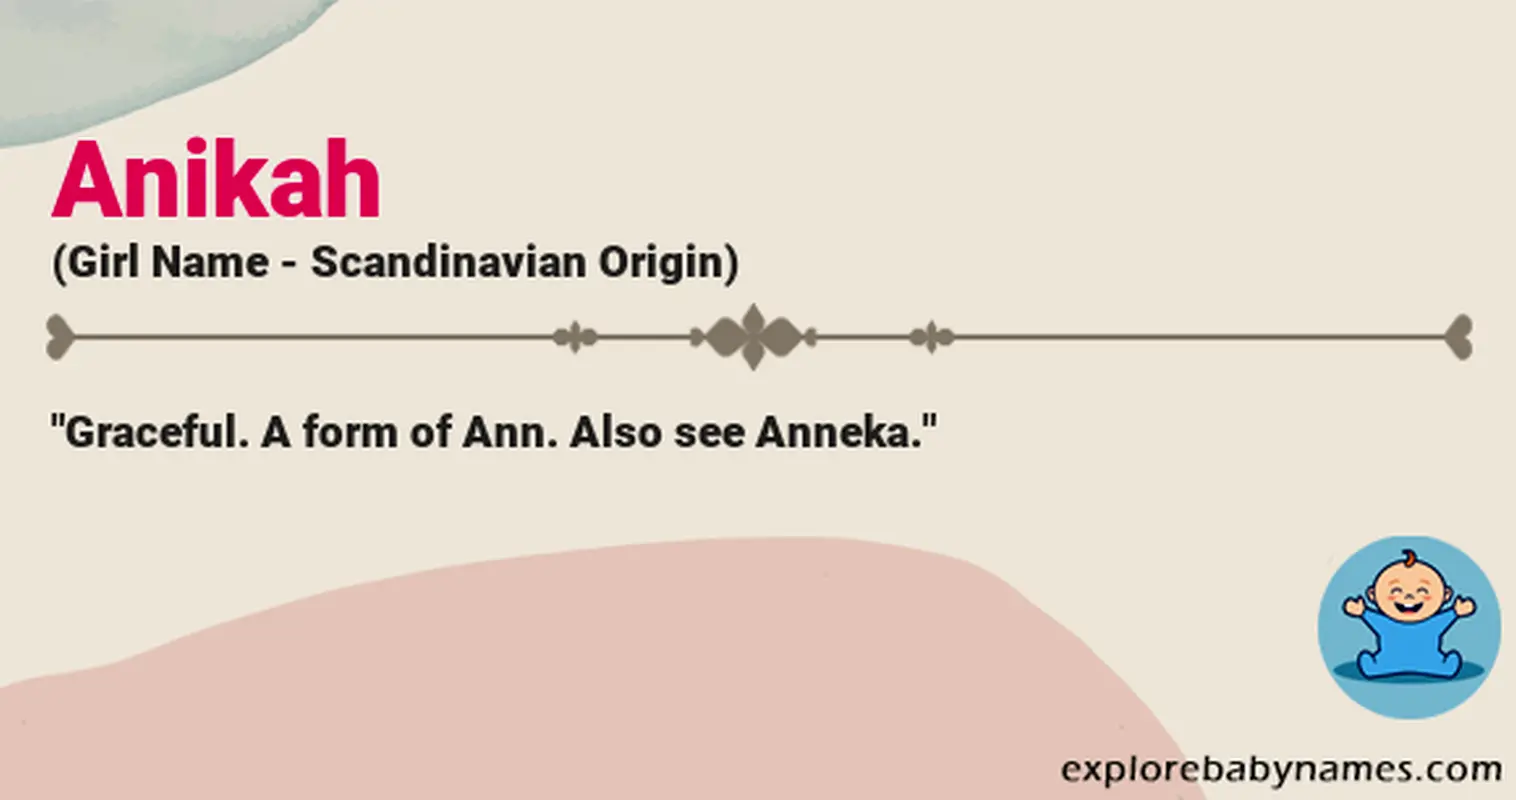 Meaning of Anikah